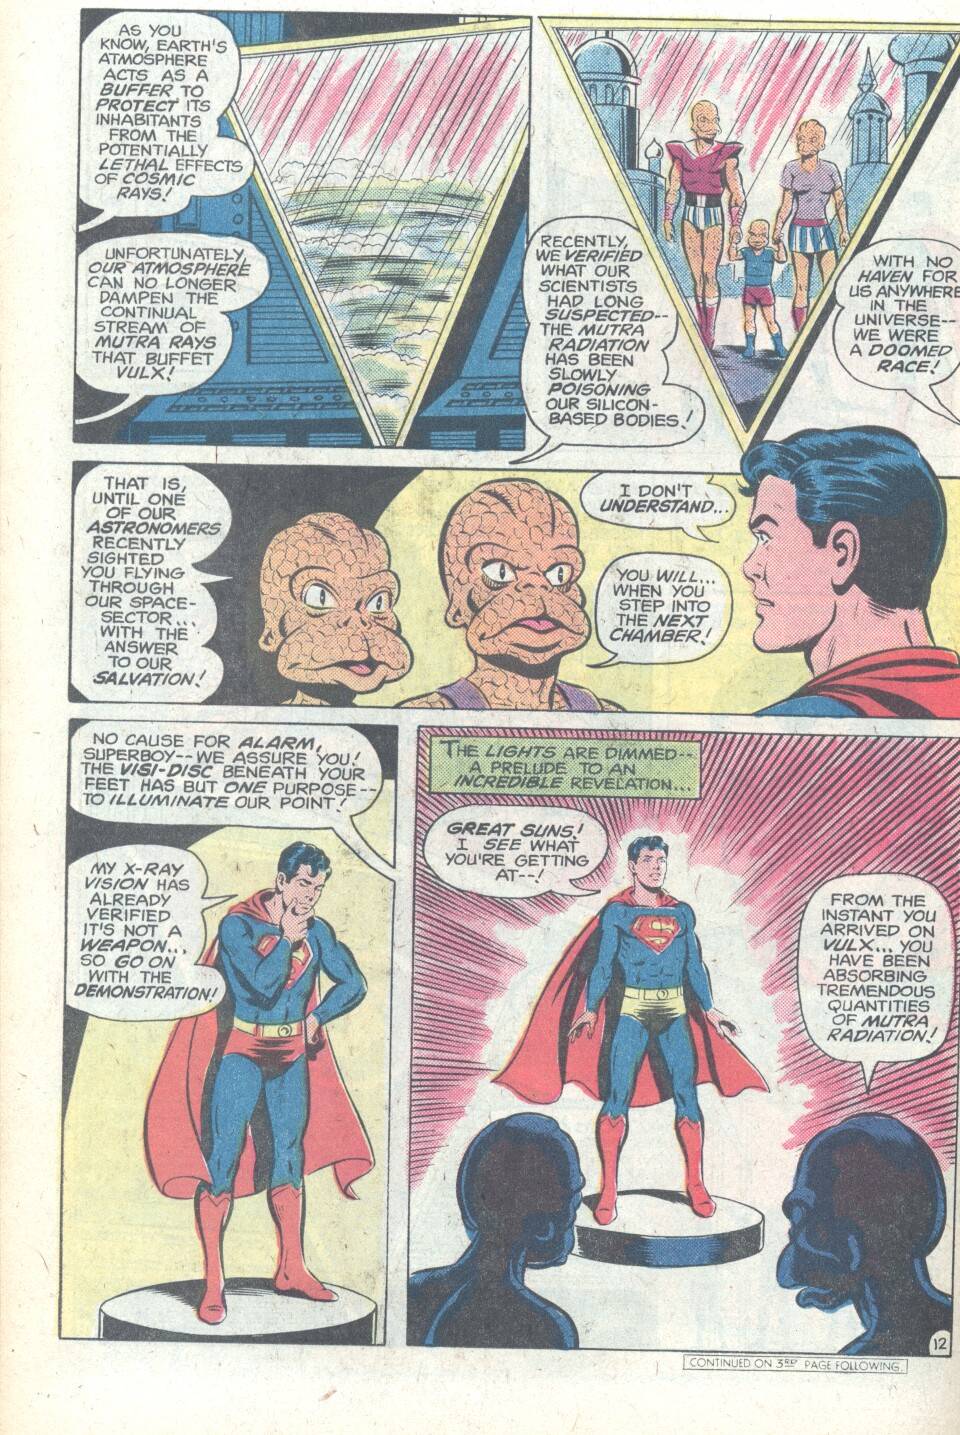 The New Adventures of Superboy 7 Page 42